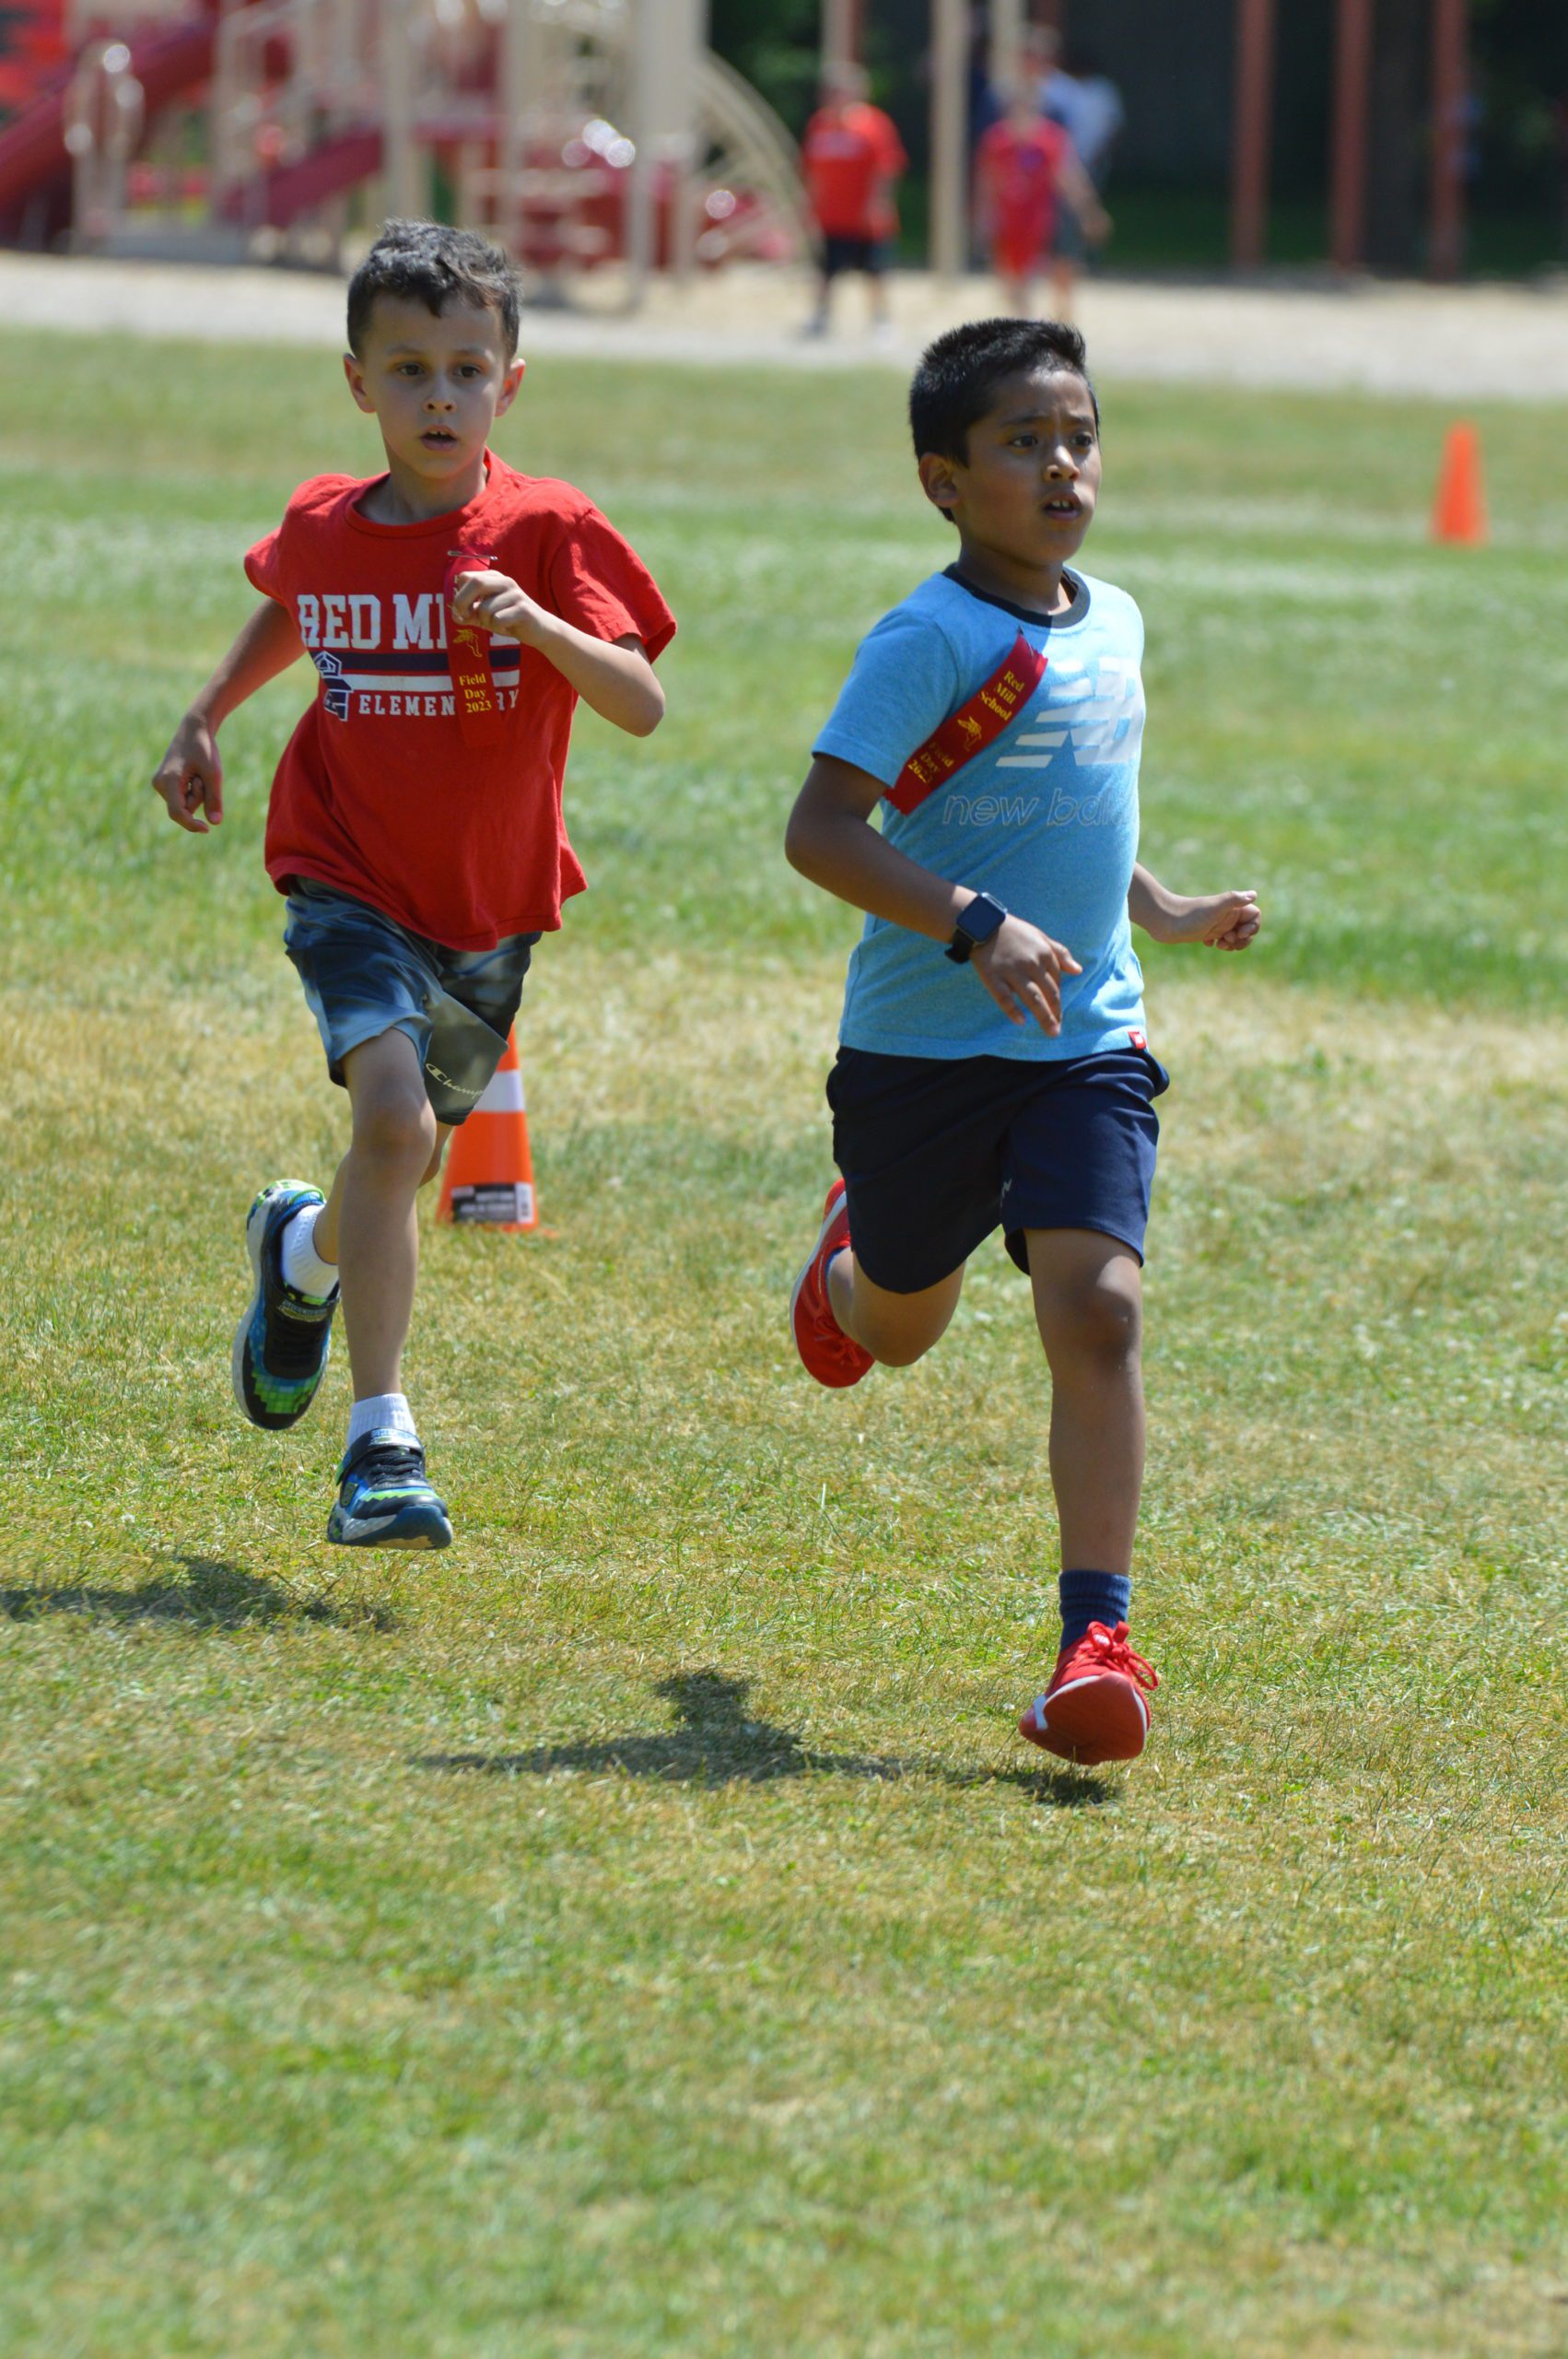 Students running at Red Mill Field Day